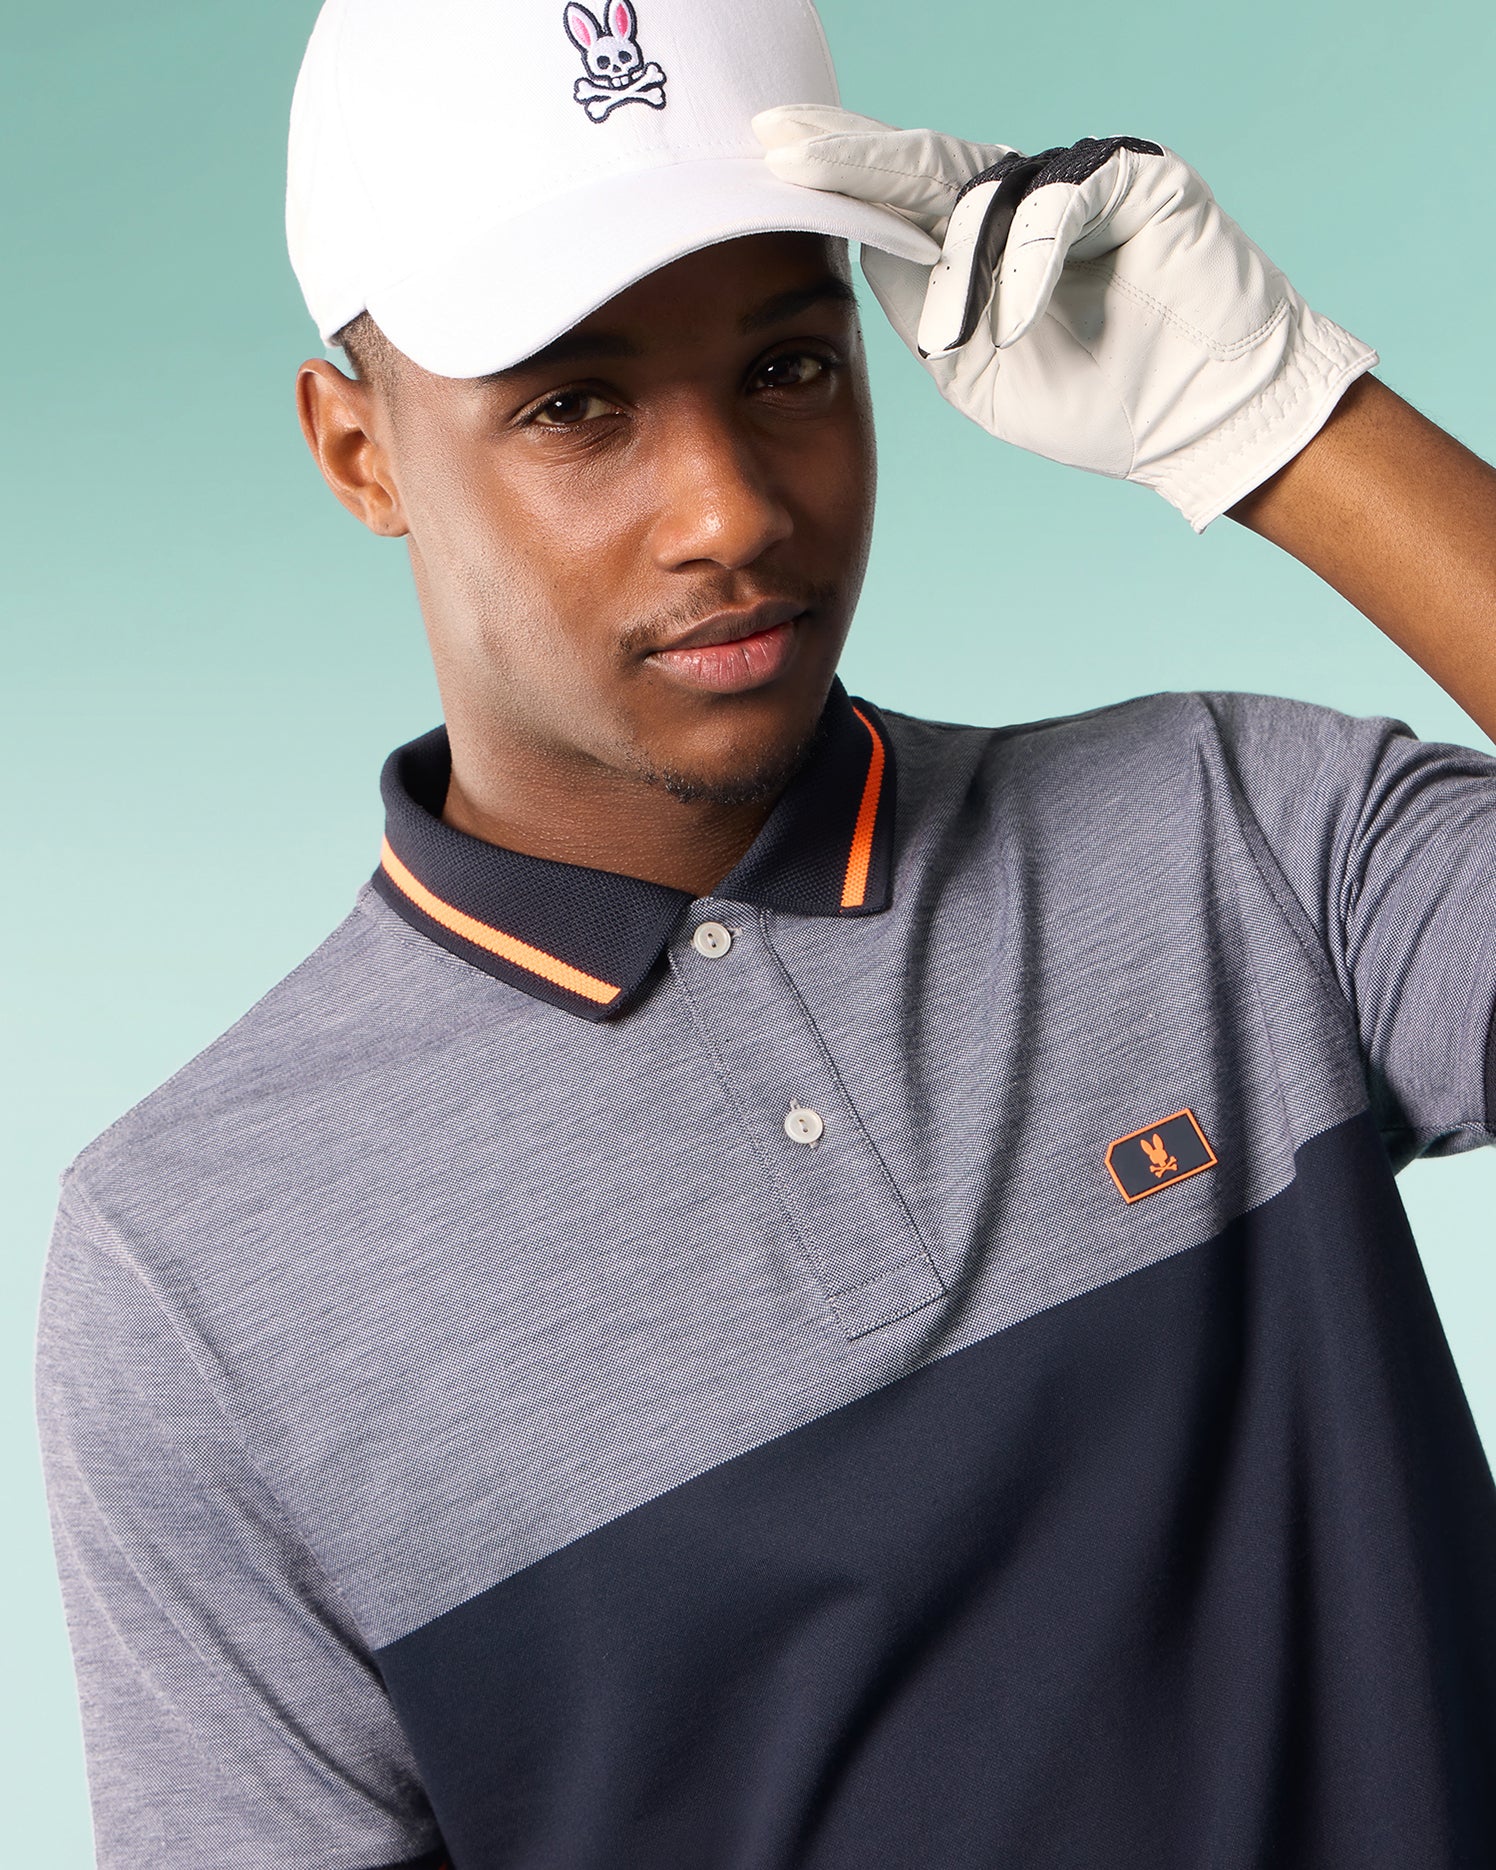 A man wearing a Psycho Bunny MENS SYRACUSE SPORT POLO SHIRT - B6K341B200 with a gray top and black bottom, complemented by an orange trim on the collar, holds the brim of his white cap adorned with a pink rabbit logo. He is also wearing a white golf glove and stands against a light teal background.